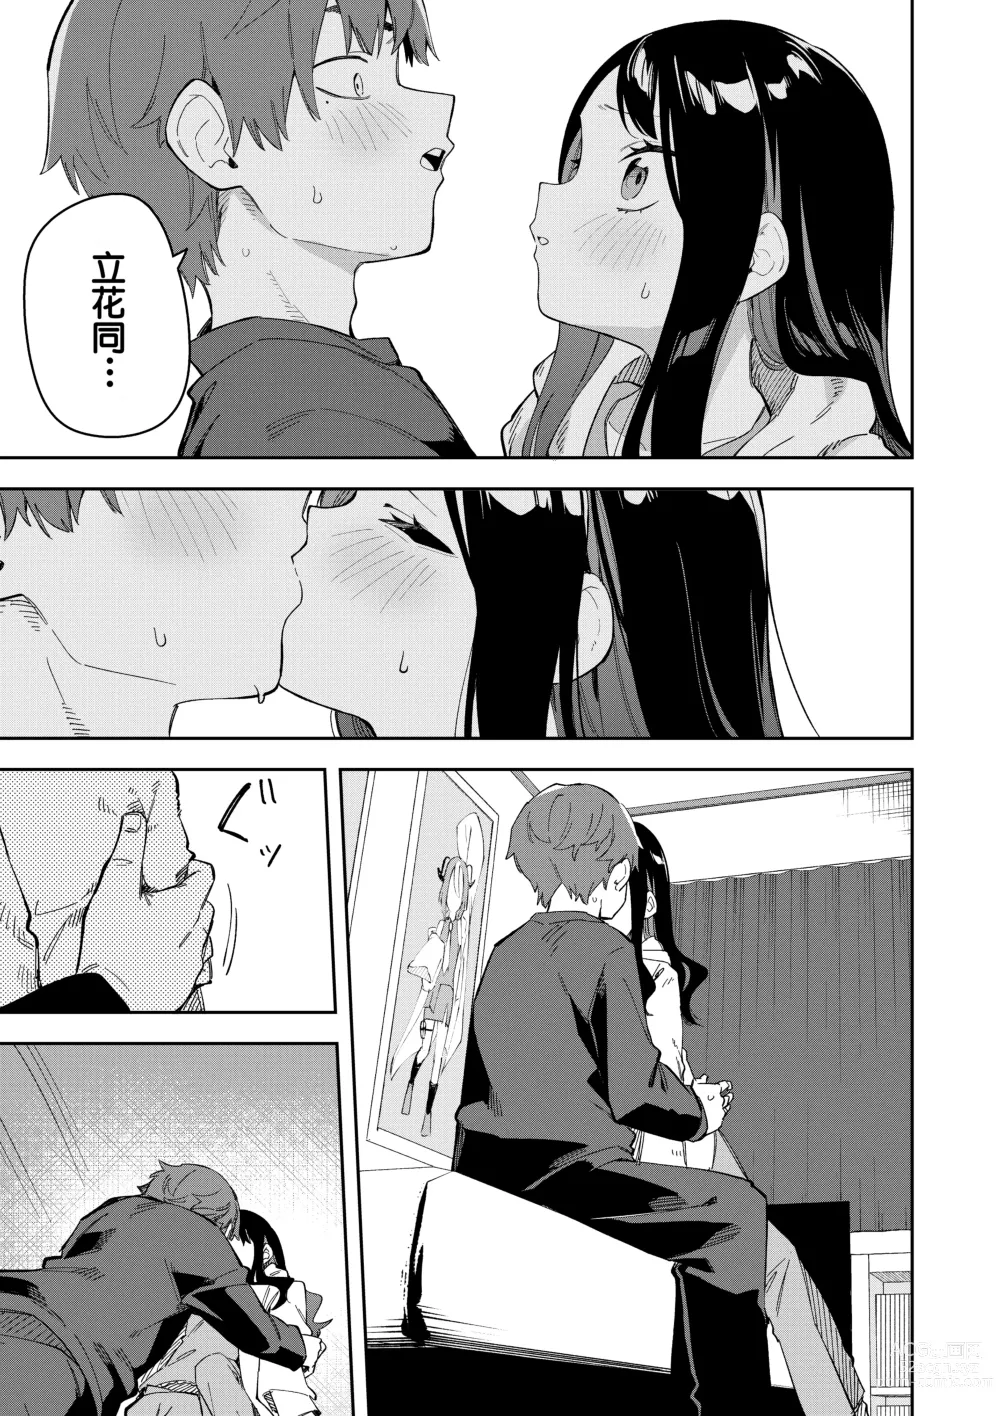 Page 21 of doujinshi 隣人は有名配信者3人目